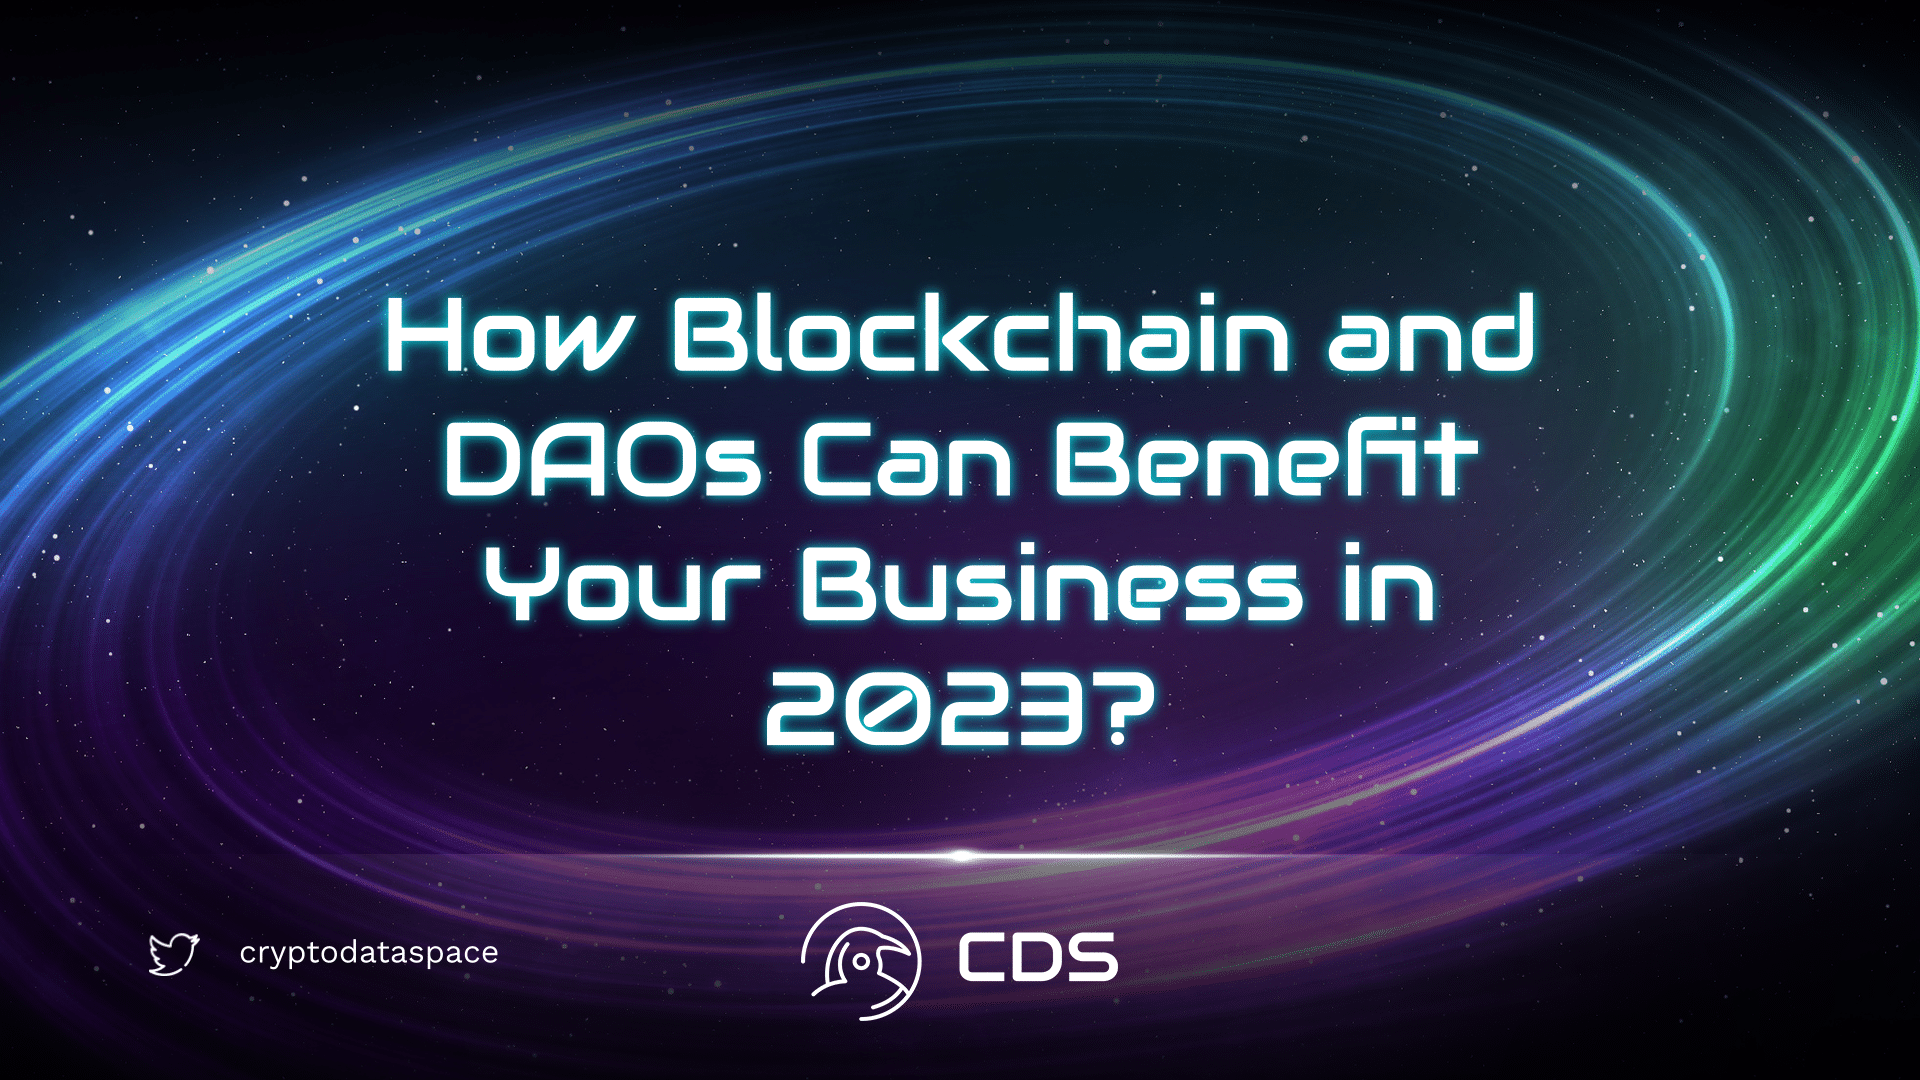 How Blockchain and DAOs Can Benefit Your Business in 2023?